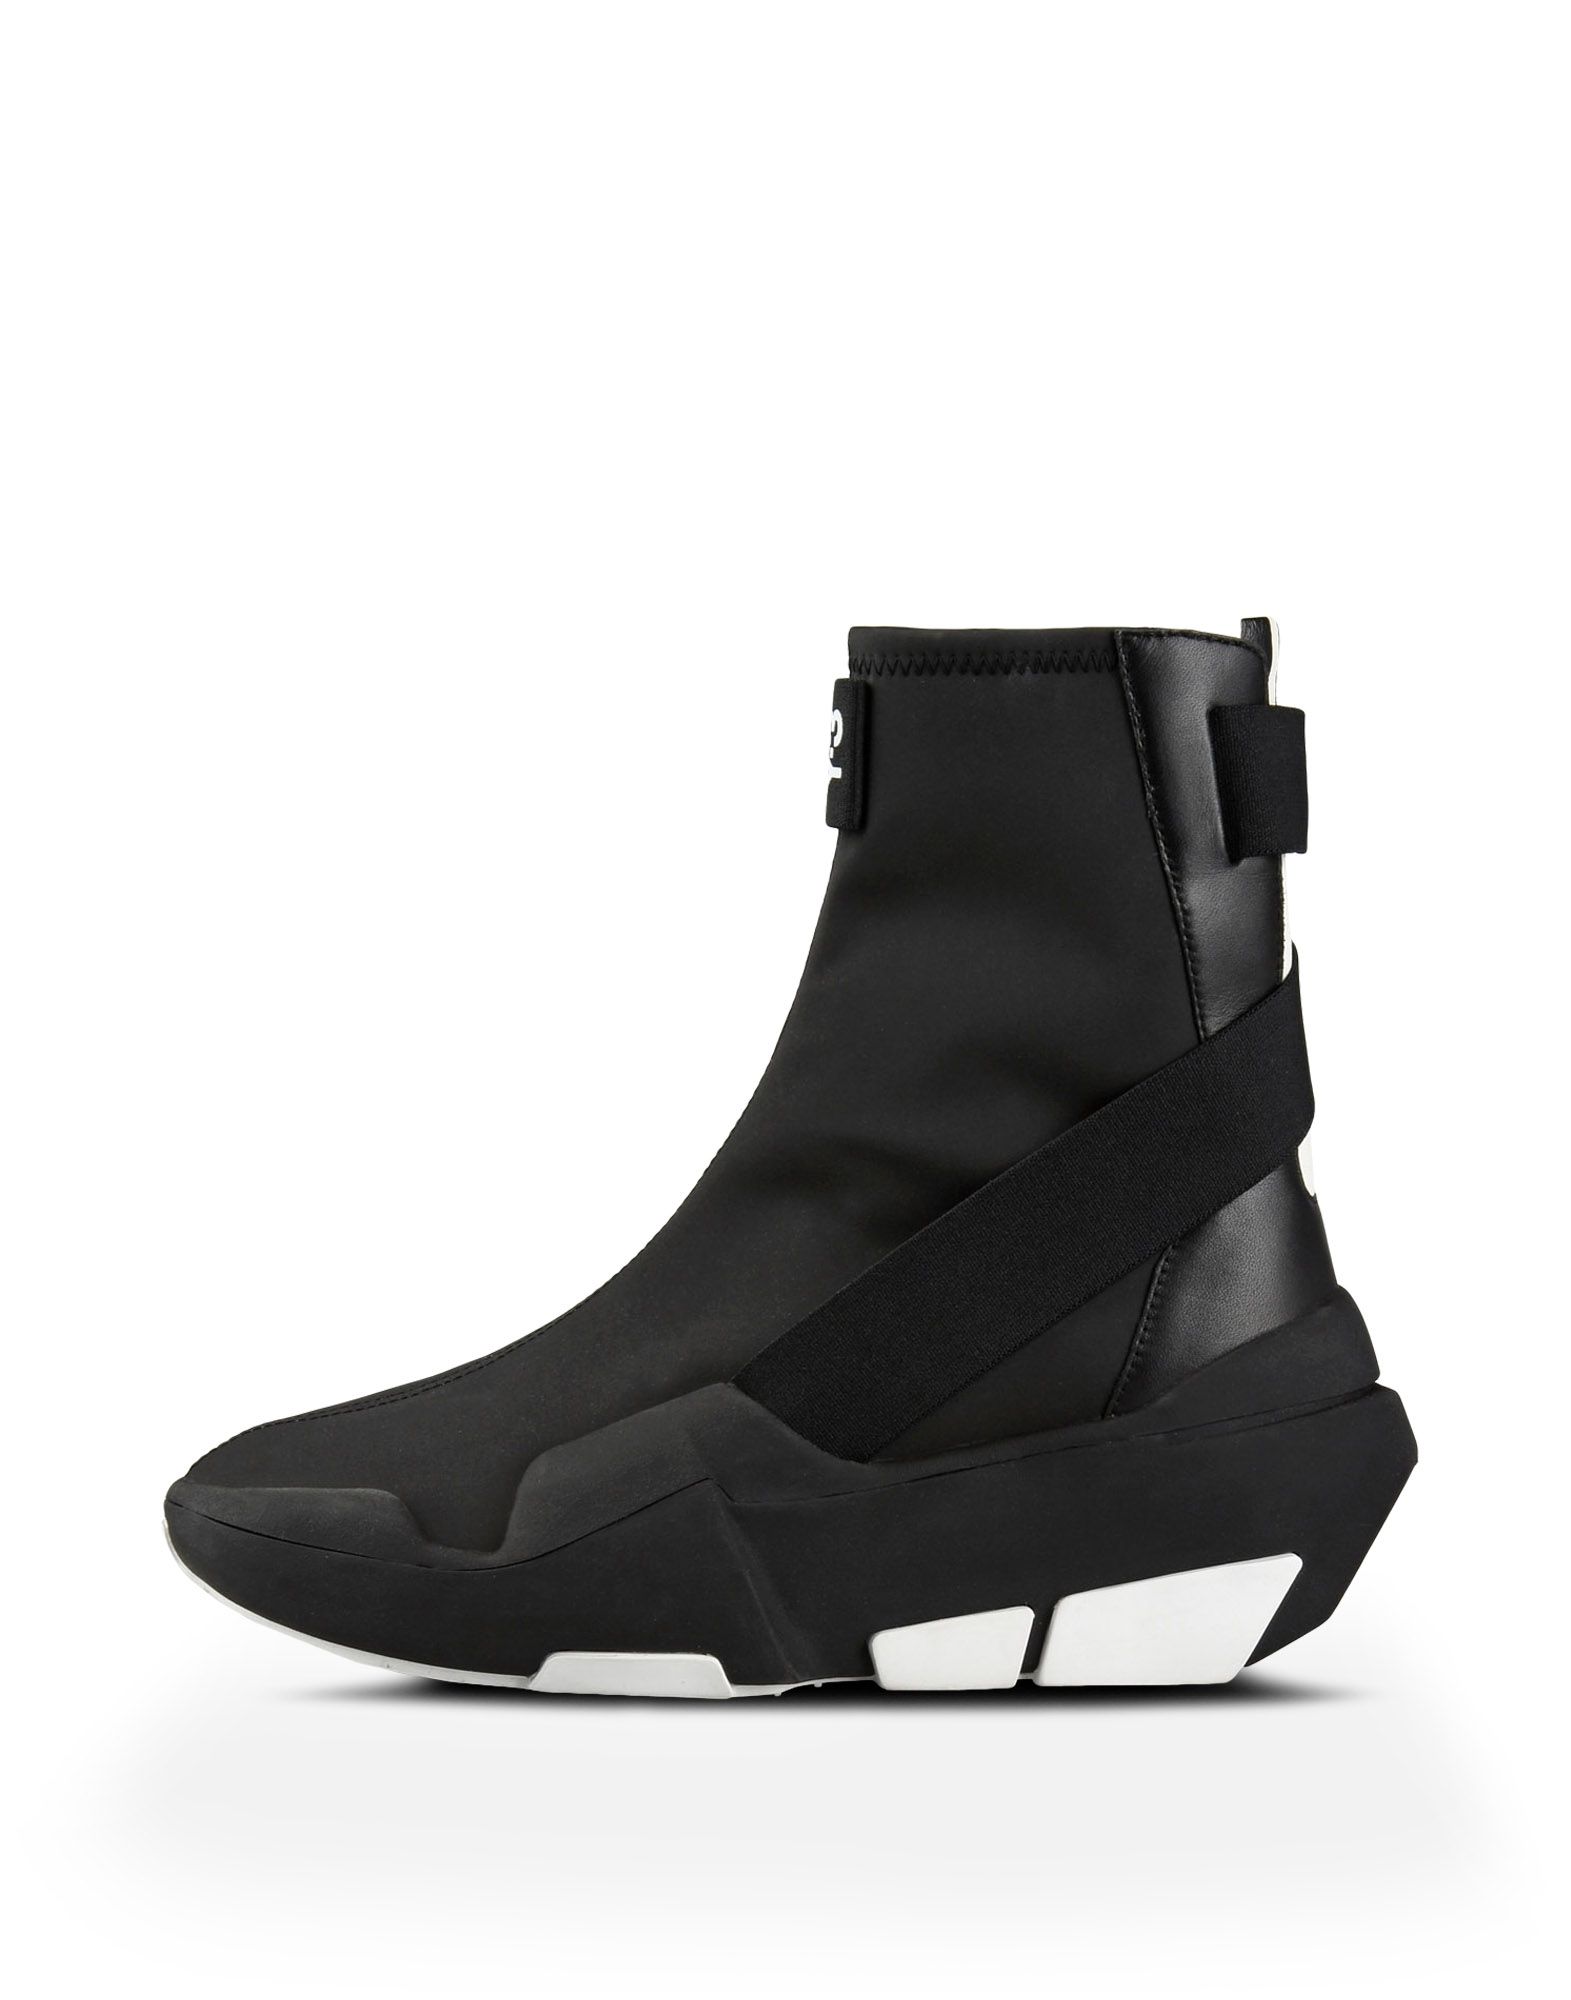 Y 3 MIRA BOOT for Women | Adidas Y-3 Official Store